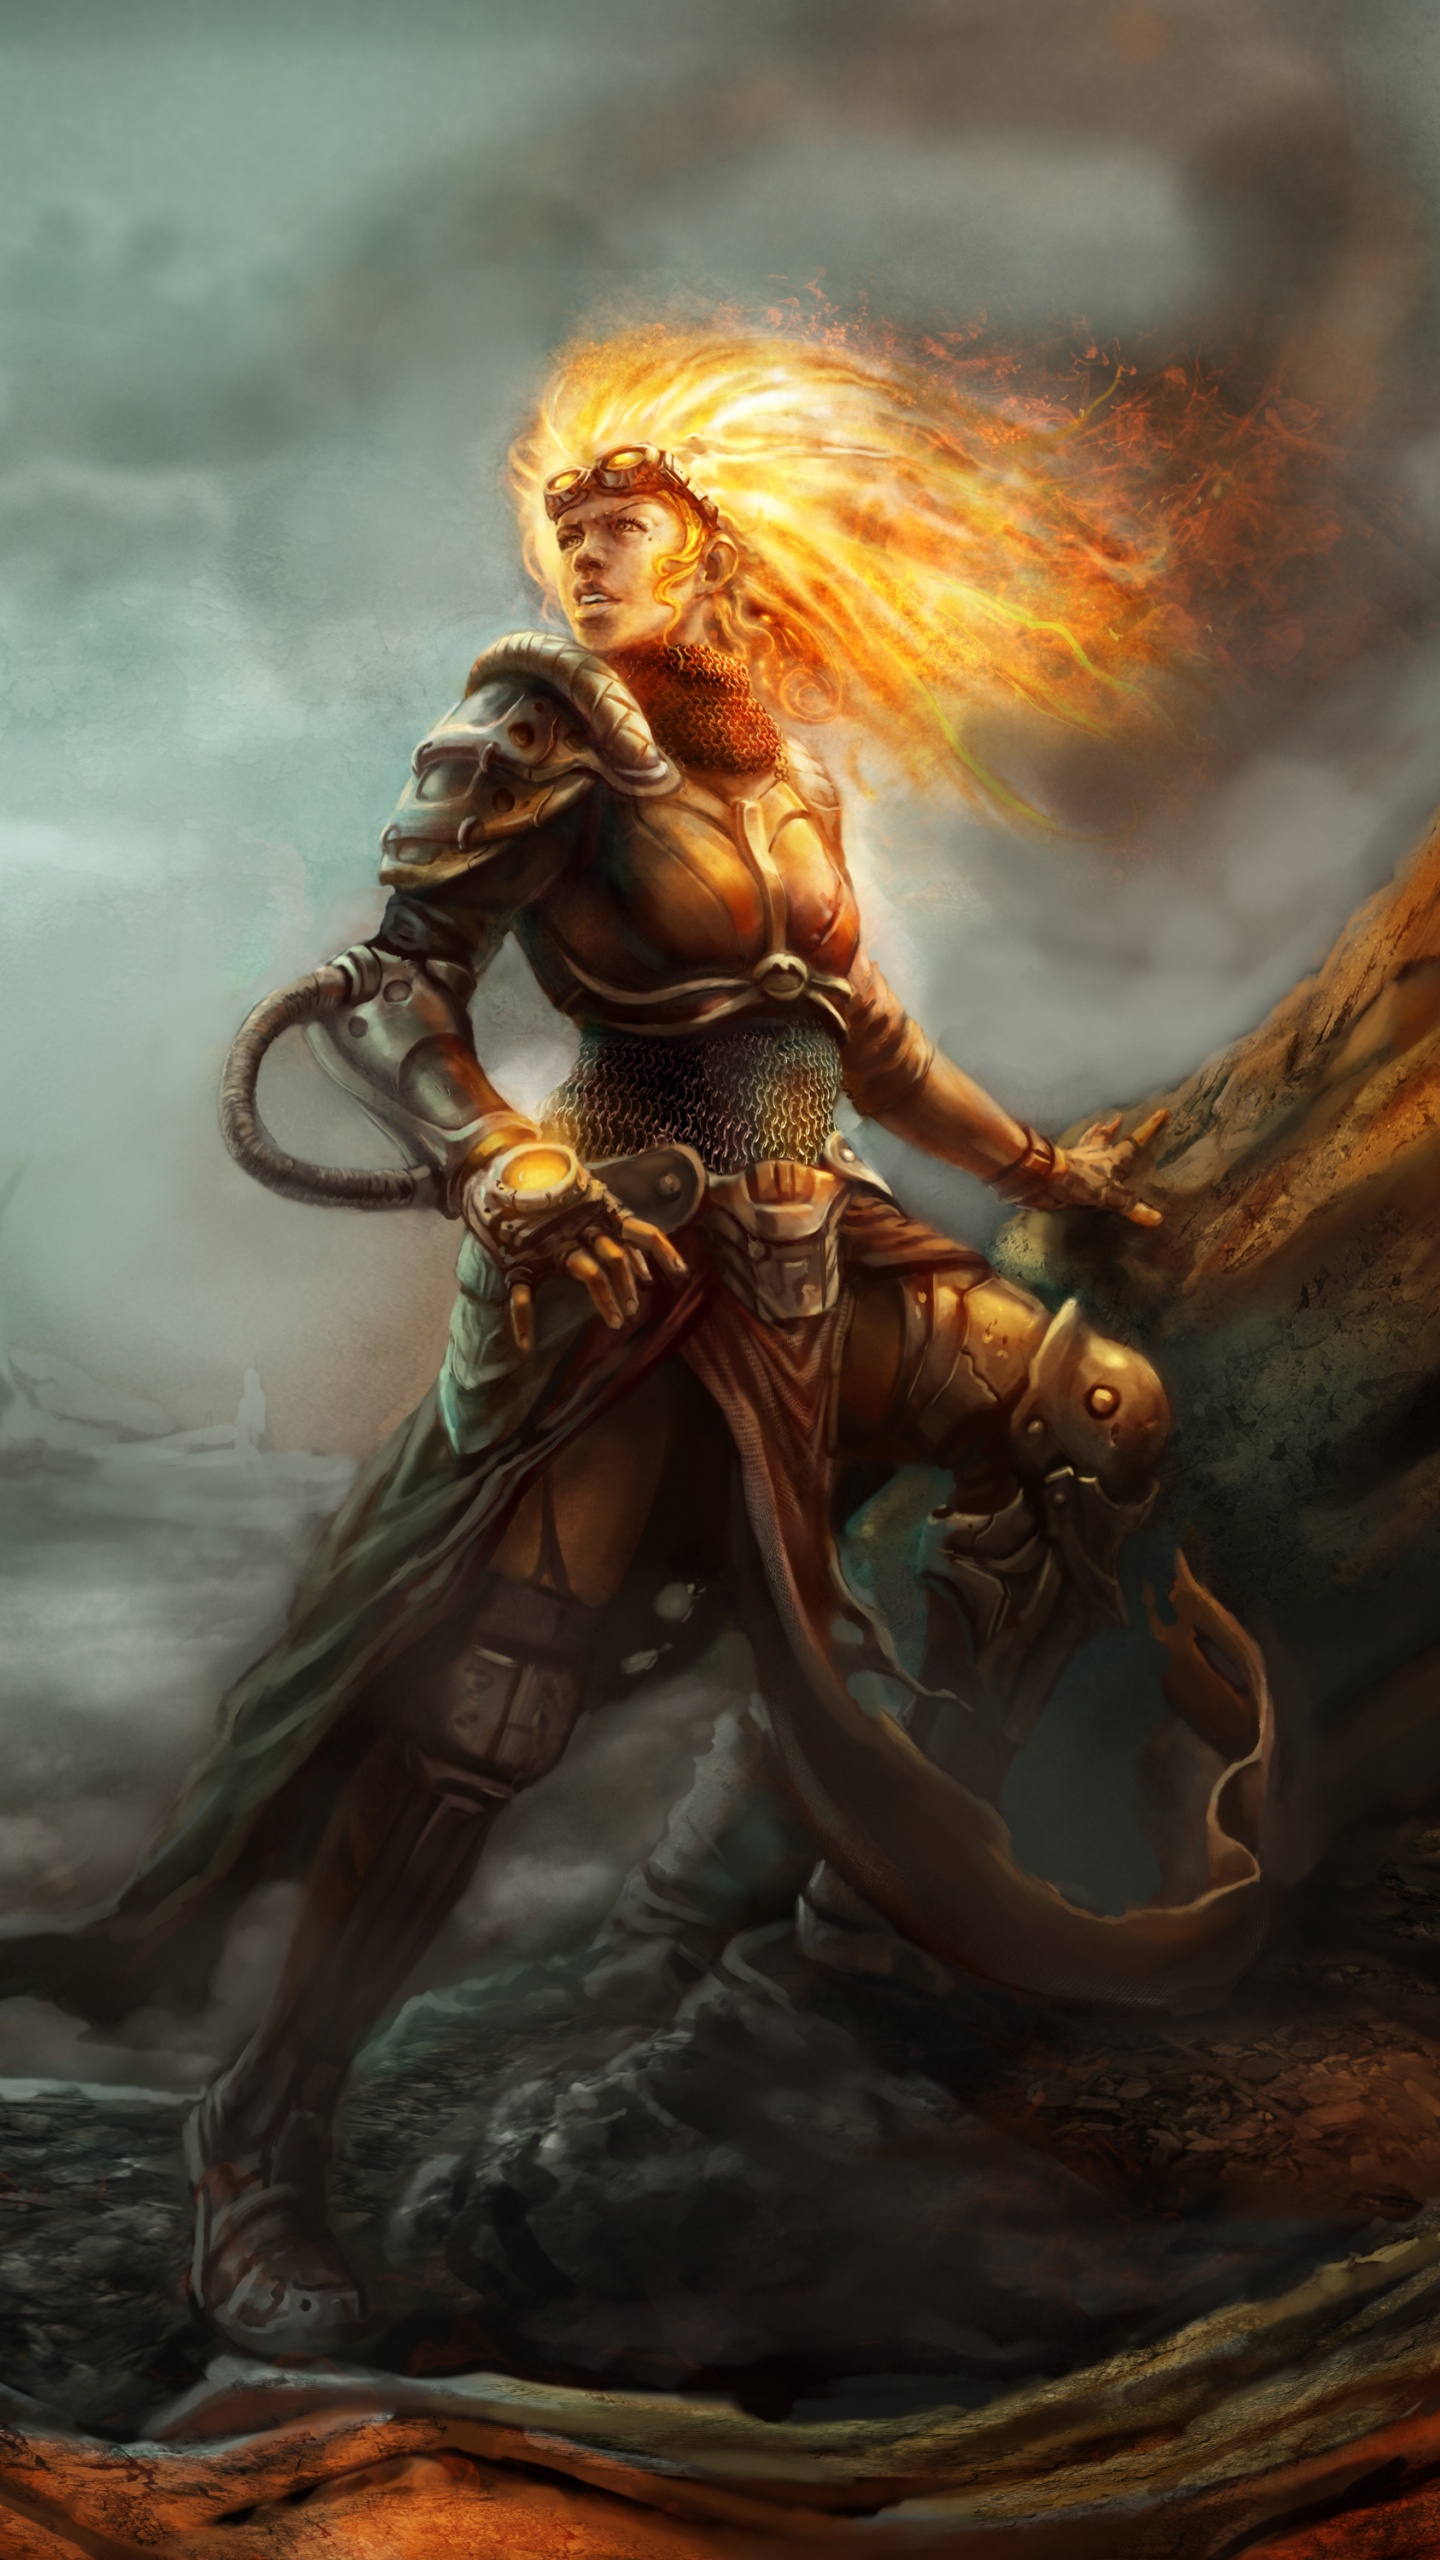 Mobile wallpaper Game Magic The Gathering 172095 download the picture  for free